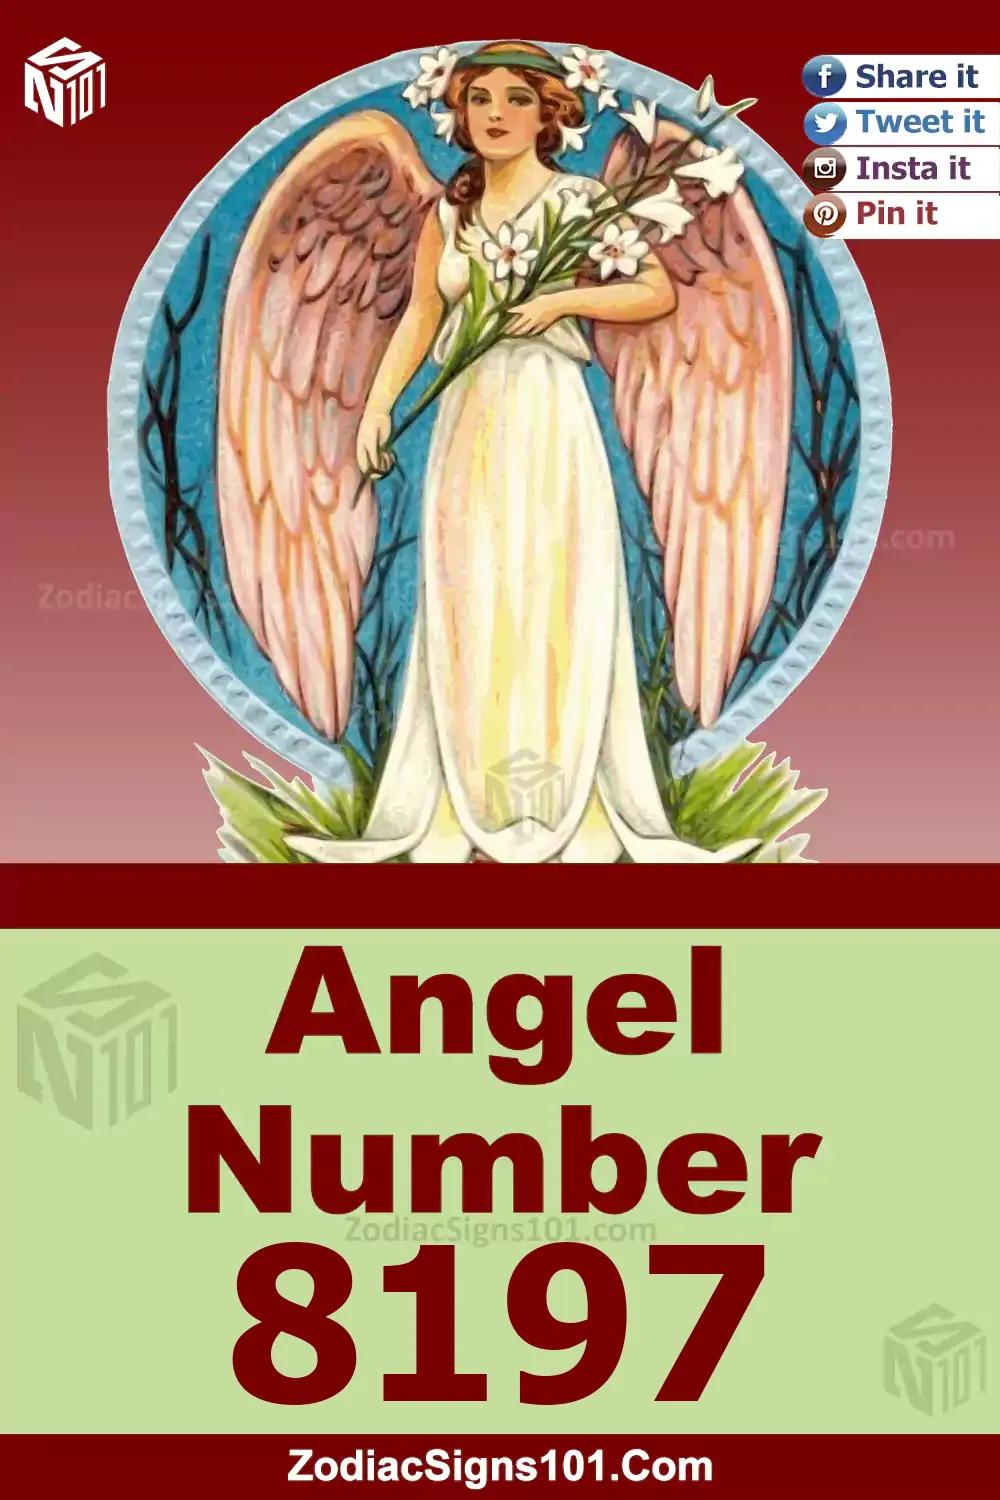 8197 Angel Number Meaning